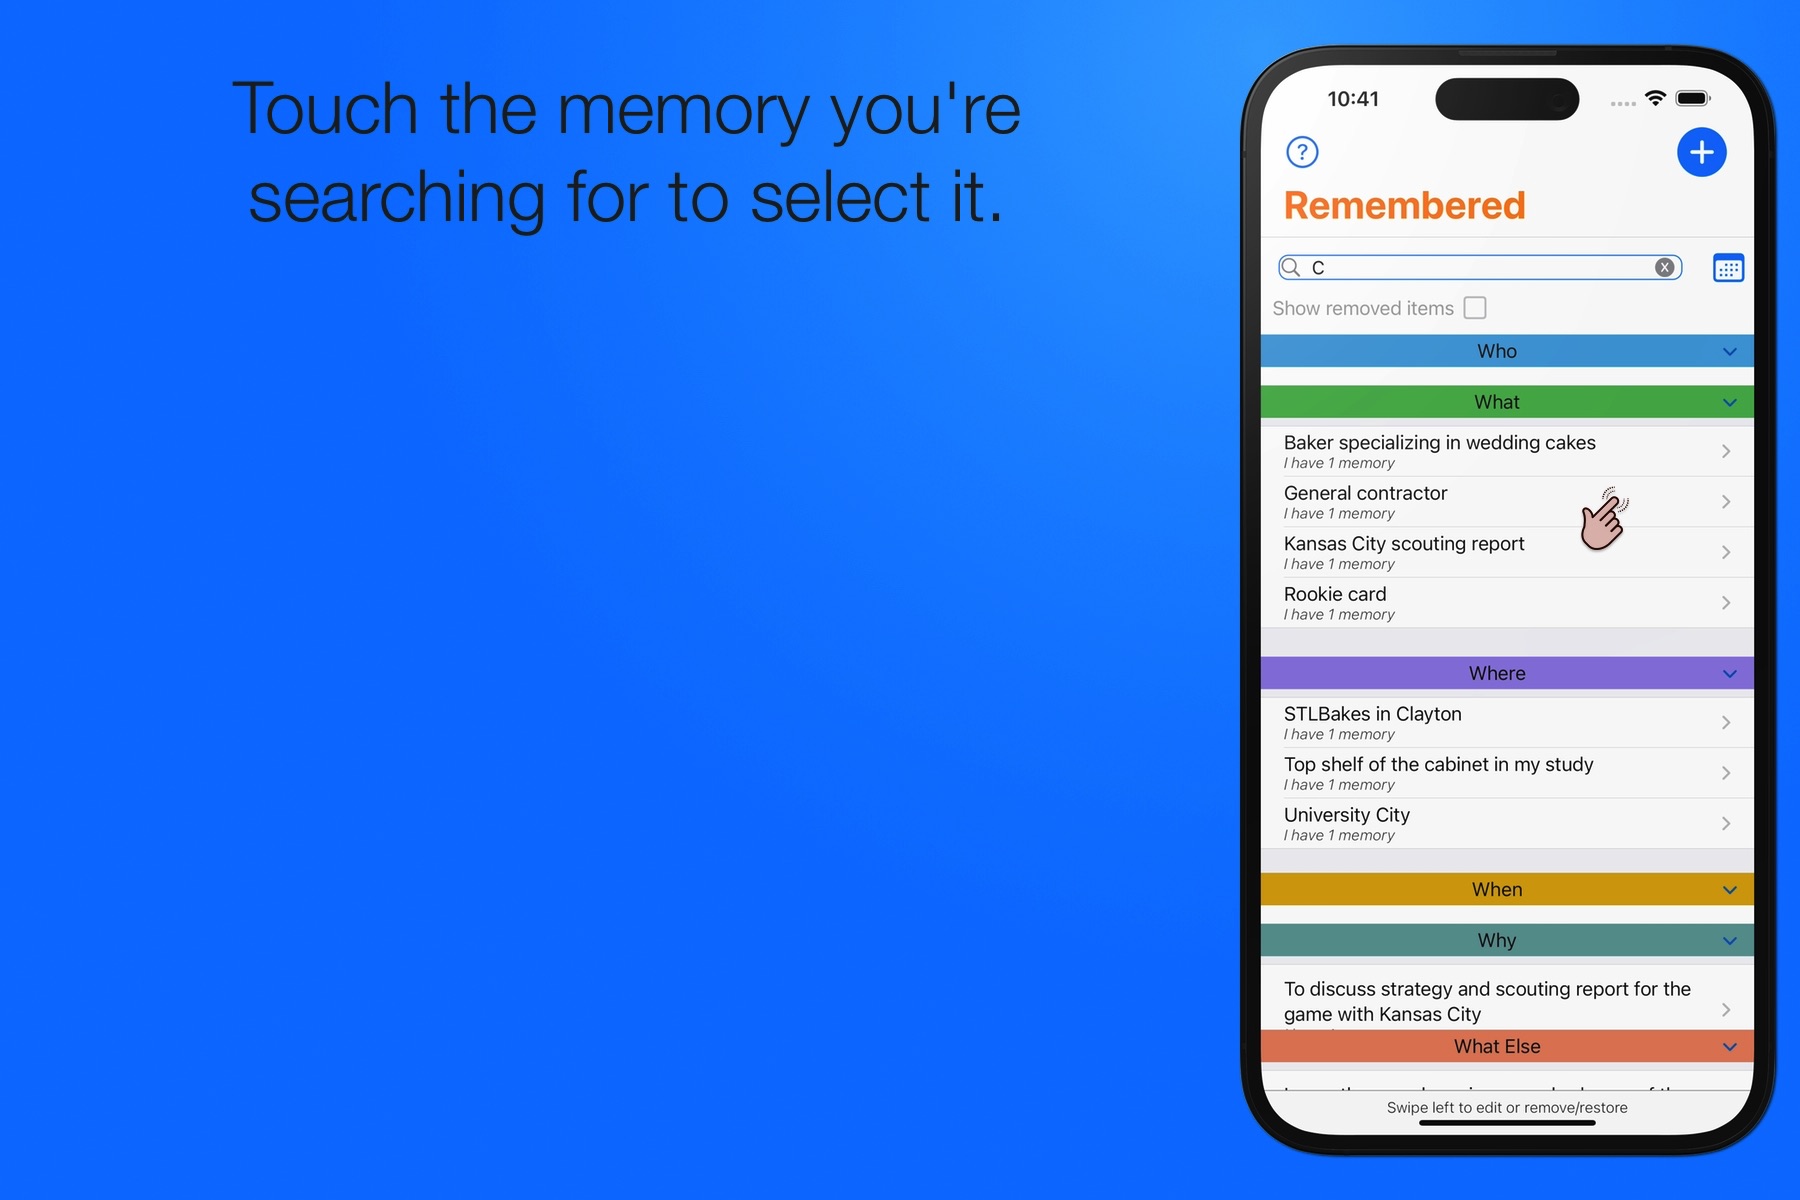 Touch the memory you're searching for to select it.